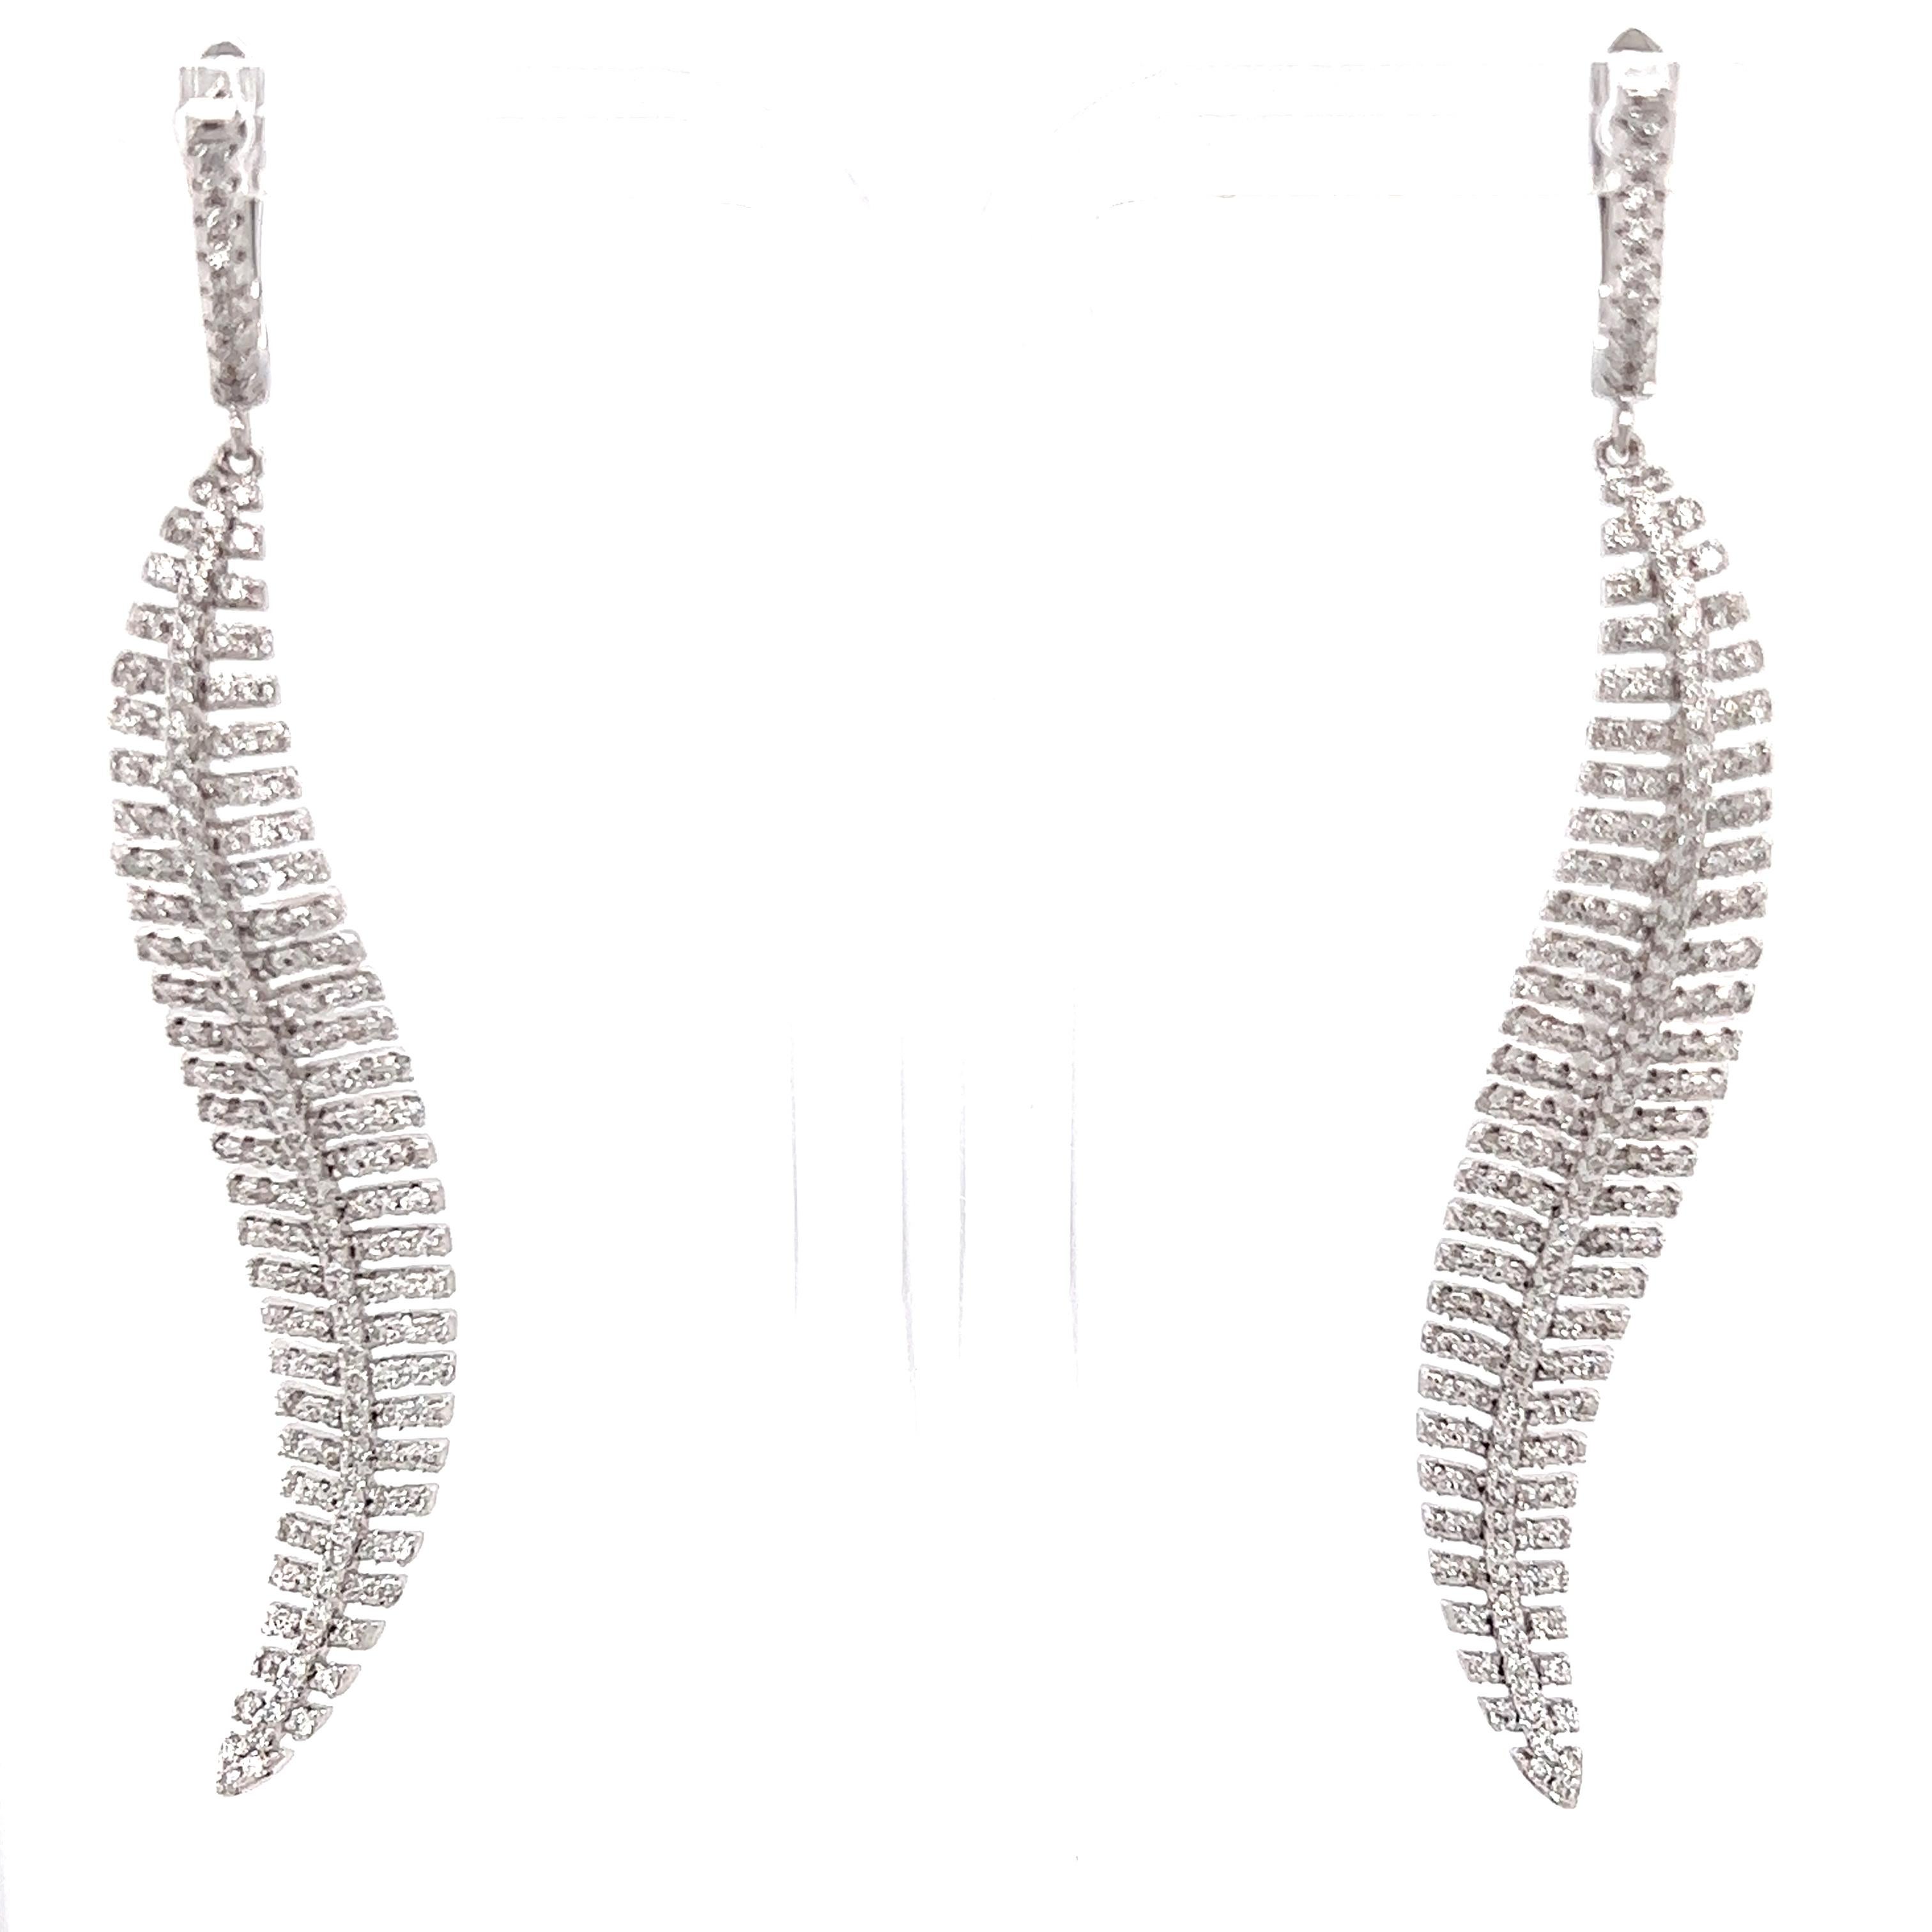 These earrings have Natural Round Cut White Diamonds that weigh 2.33 carats. The clarity and color of the earrings are VS-F. 

They are 2.75 inches long and are curated in 14 Karat White Gold with an approximate weight of 12.9 grams. 

Stunning